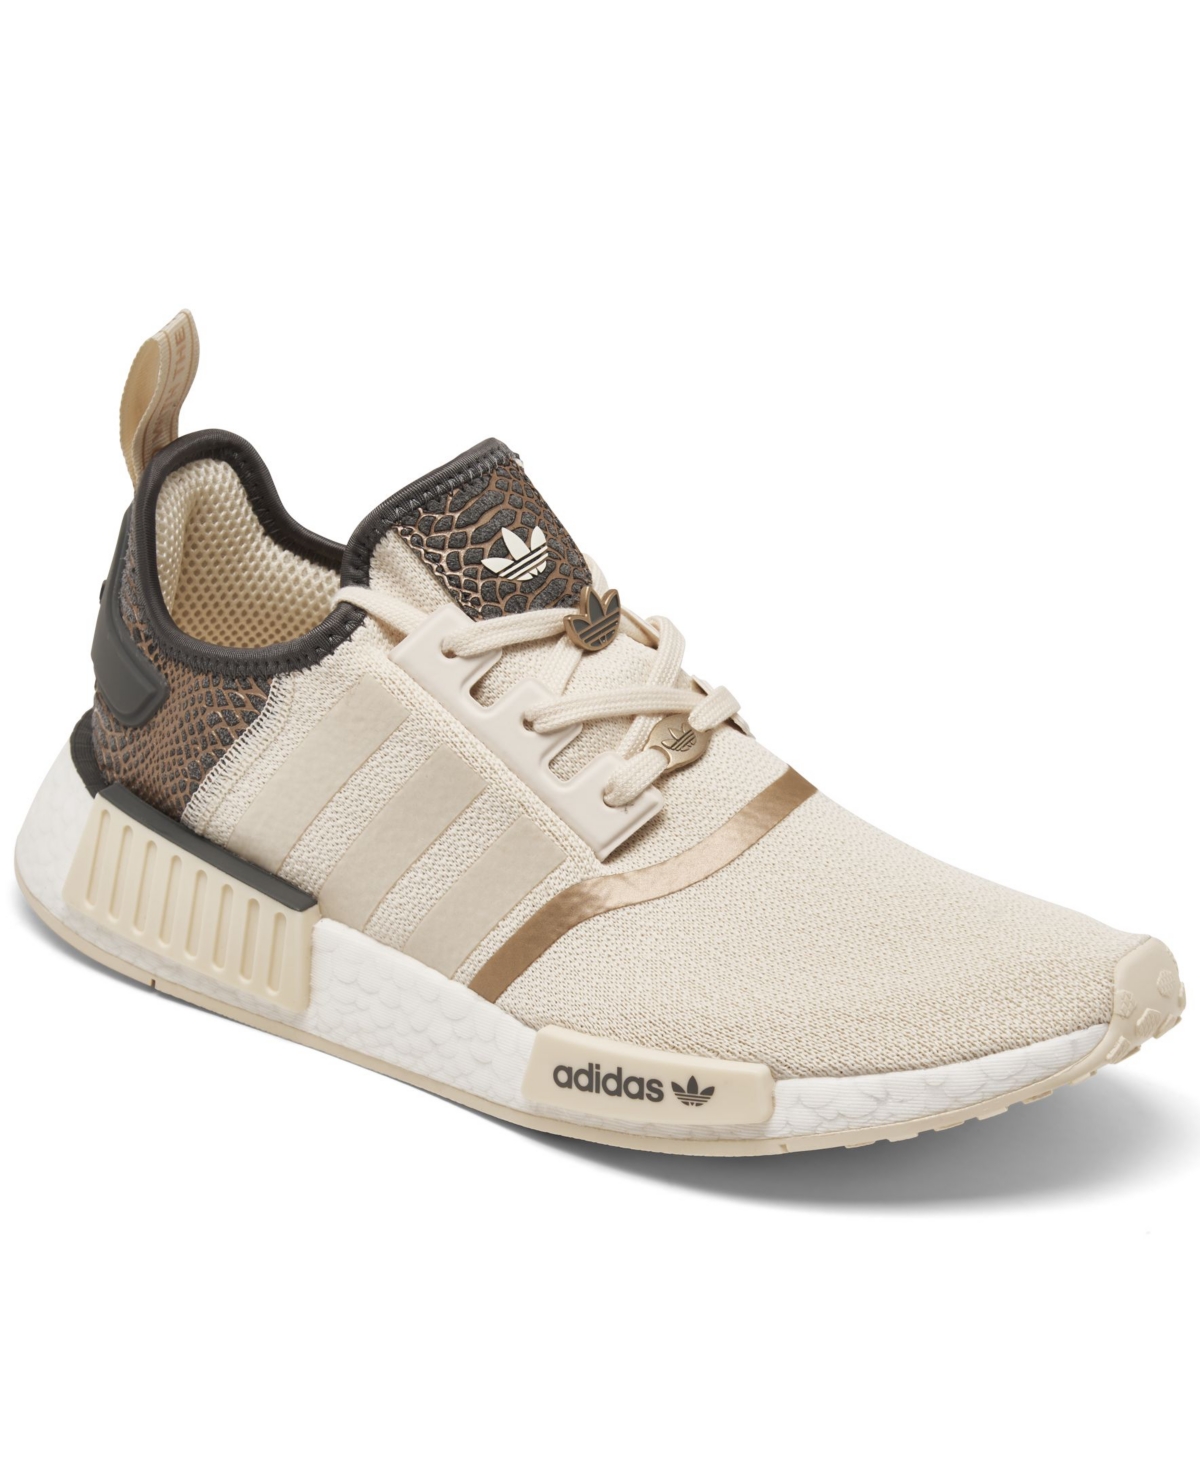 adidas Women's Nmd R1 Sneakers from Finish Line | Smart